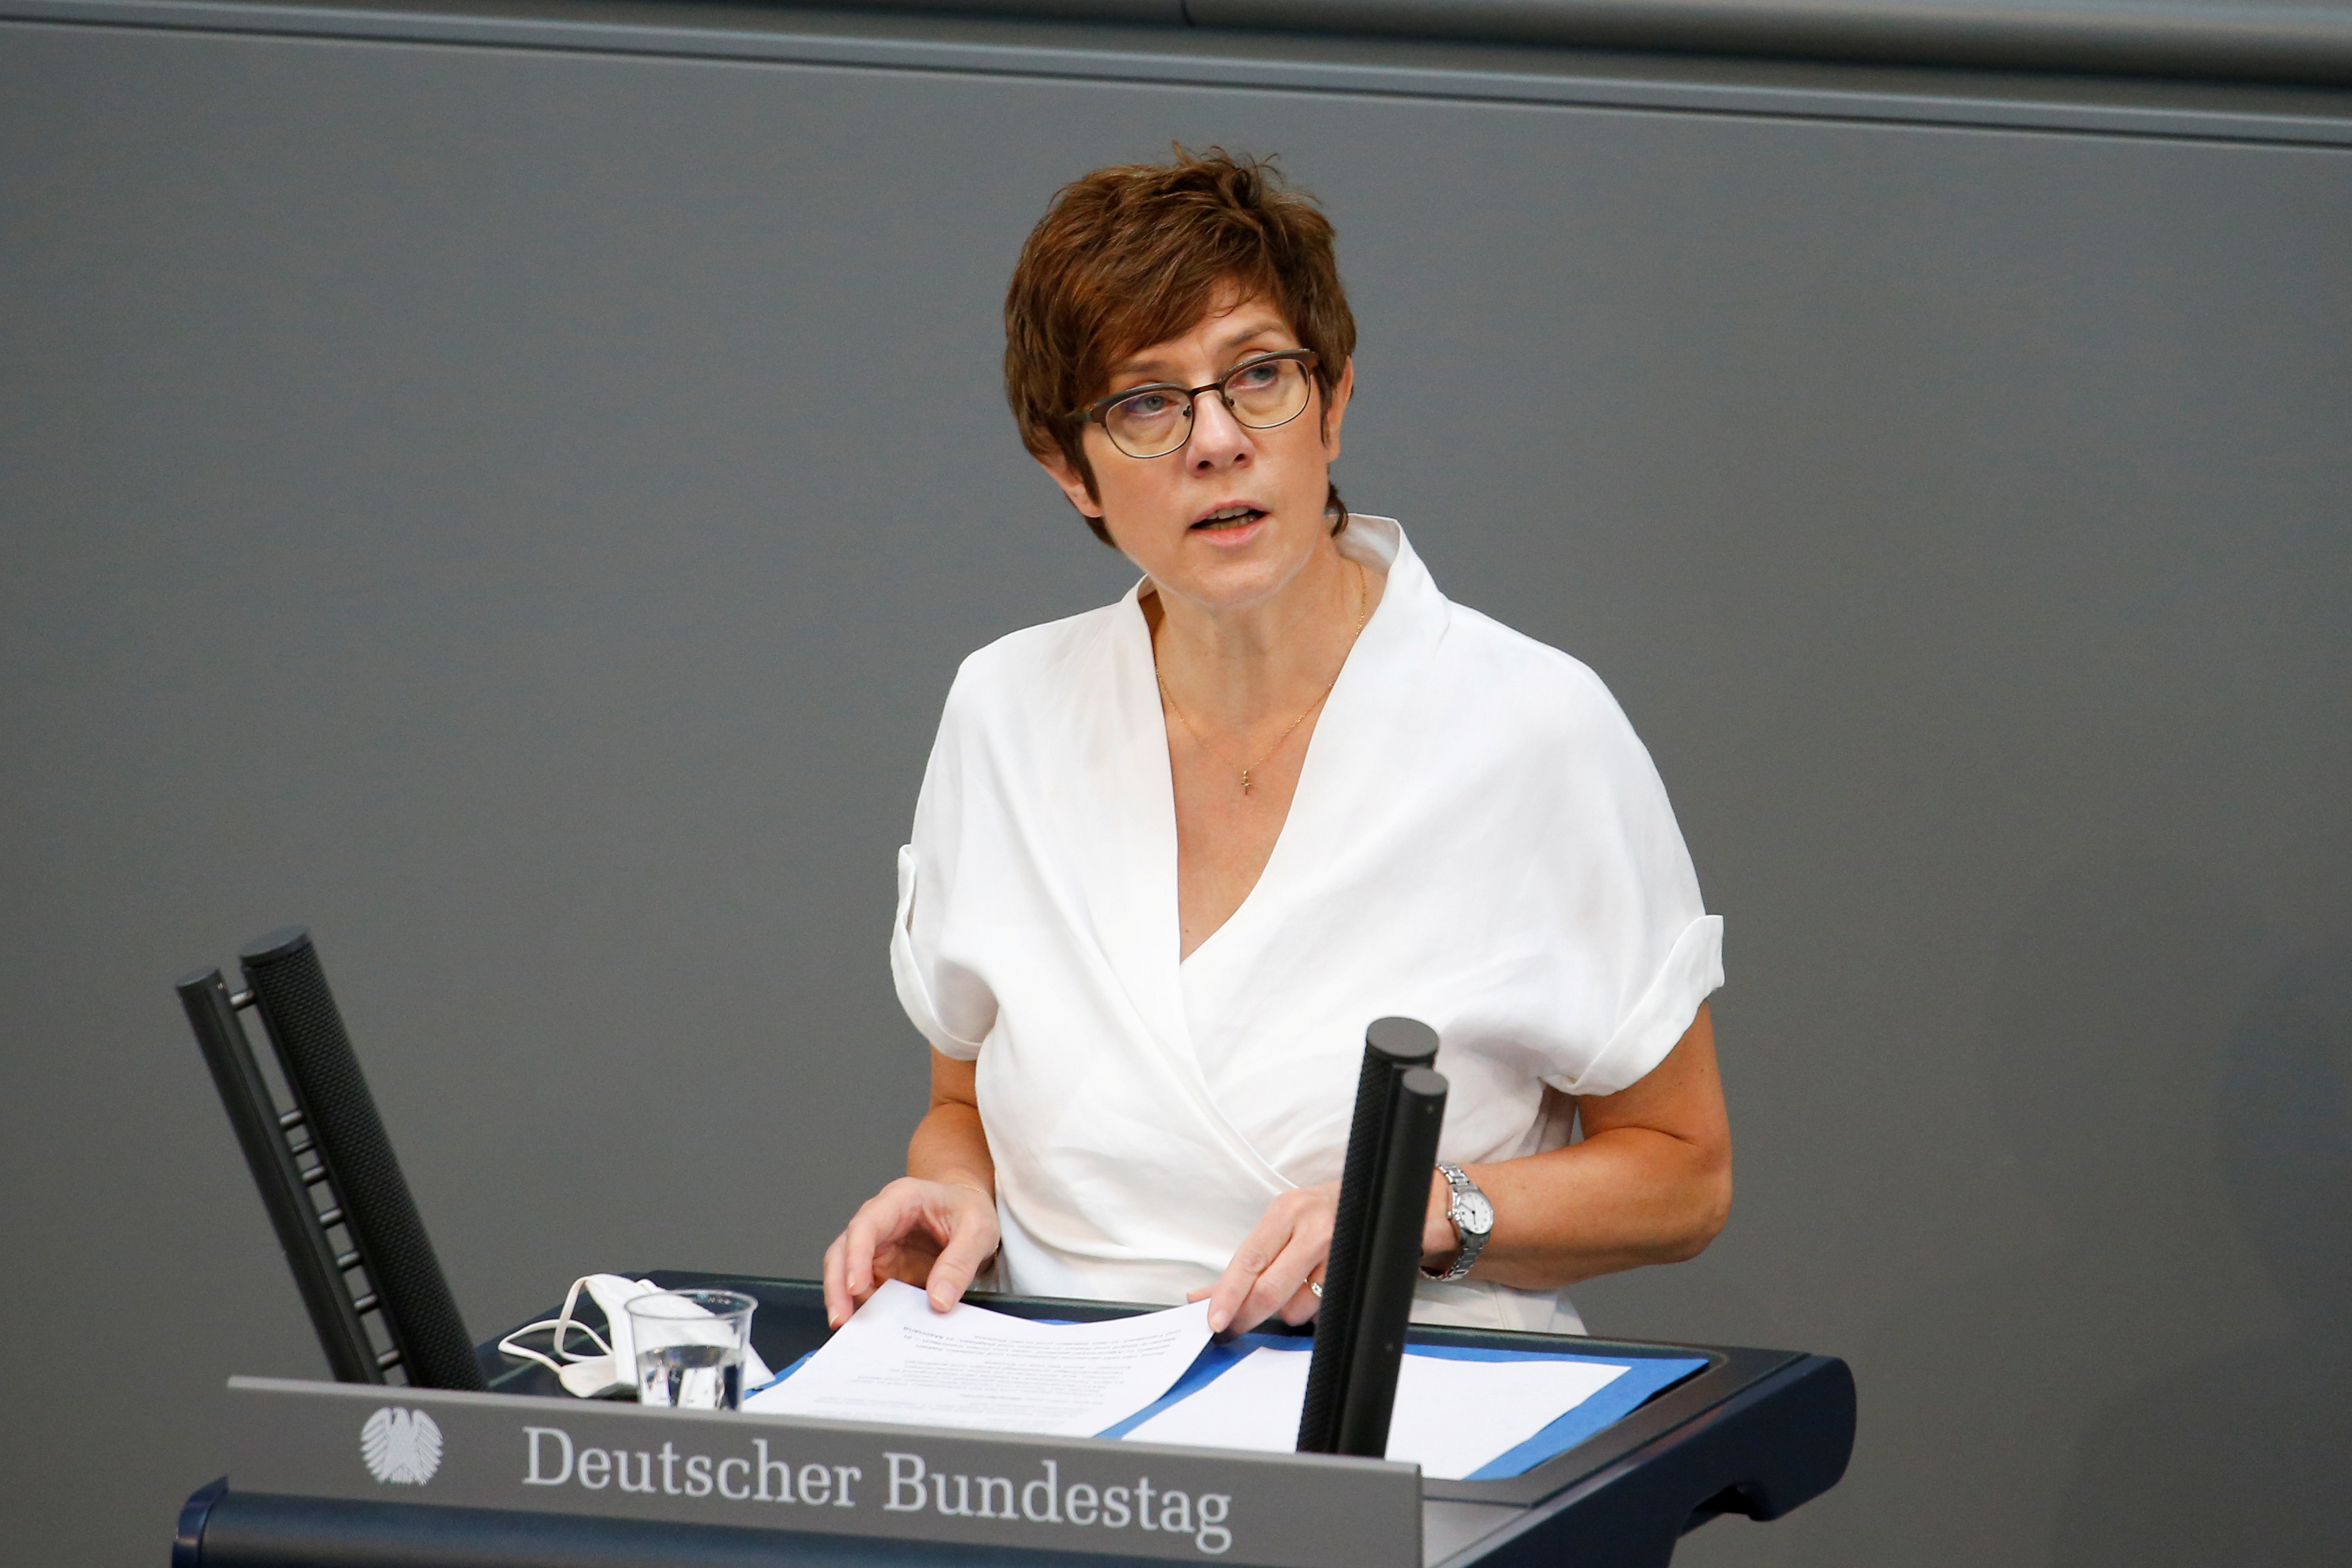 German Defense Minister Annegret Kramp-Karrenbauer speaks during the last session of the lower house of parliament Bundestag before federal elections, in Berlin, Germany, June 23, 2021. REUTERS/Michele Tantussi/File Photo